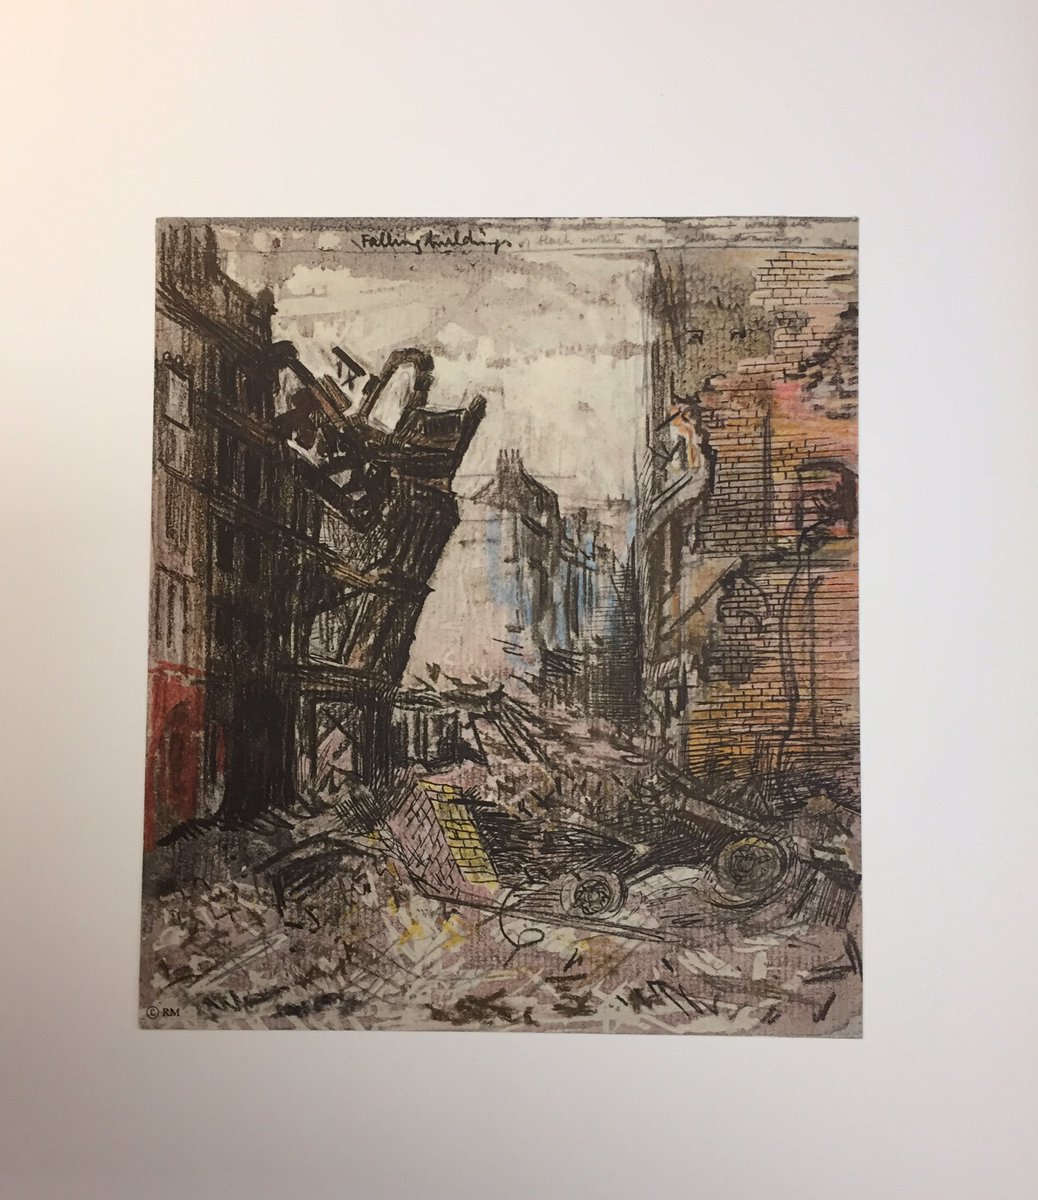 Just in - 1967 Portfolio of 80 prints (overseen by HM) from Henry Moore’s shelter sketchbooks - wonderful evocations of wartime London, above and below ground!